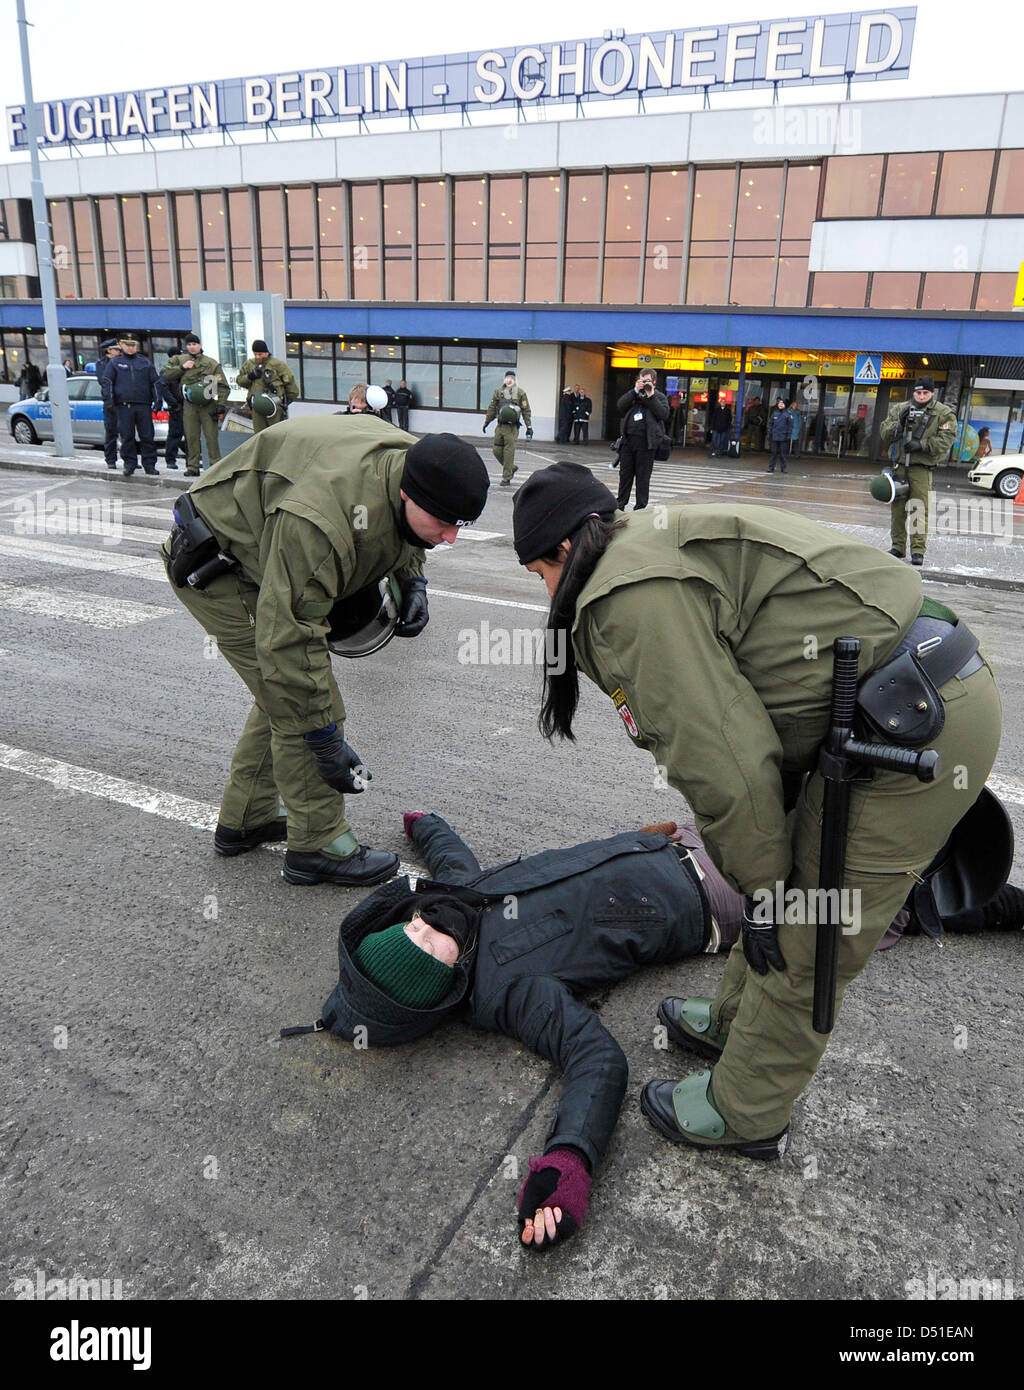 Police officers prepare to carry away a demonstrant lying on the street during a protest action at the Berlin airport in Schoenefeld, Germany, 6 December 2010. Adolescents protest against the planned deportation of a Vietnamese in front of the airport. Photo: Bernd Settnik Stock Photo